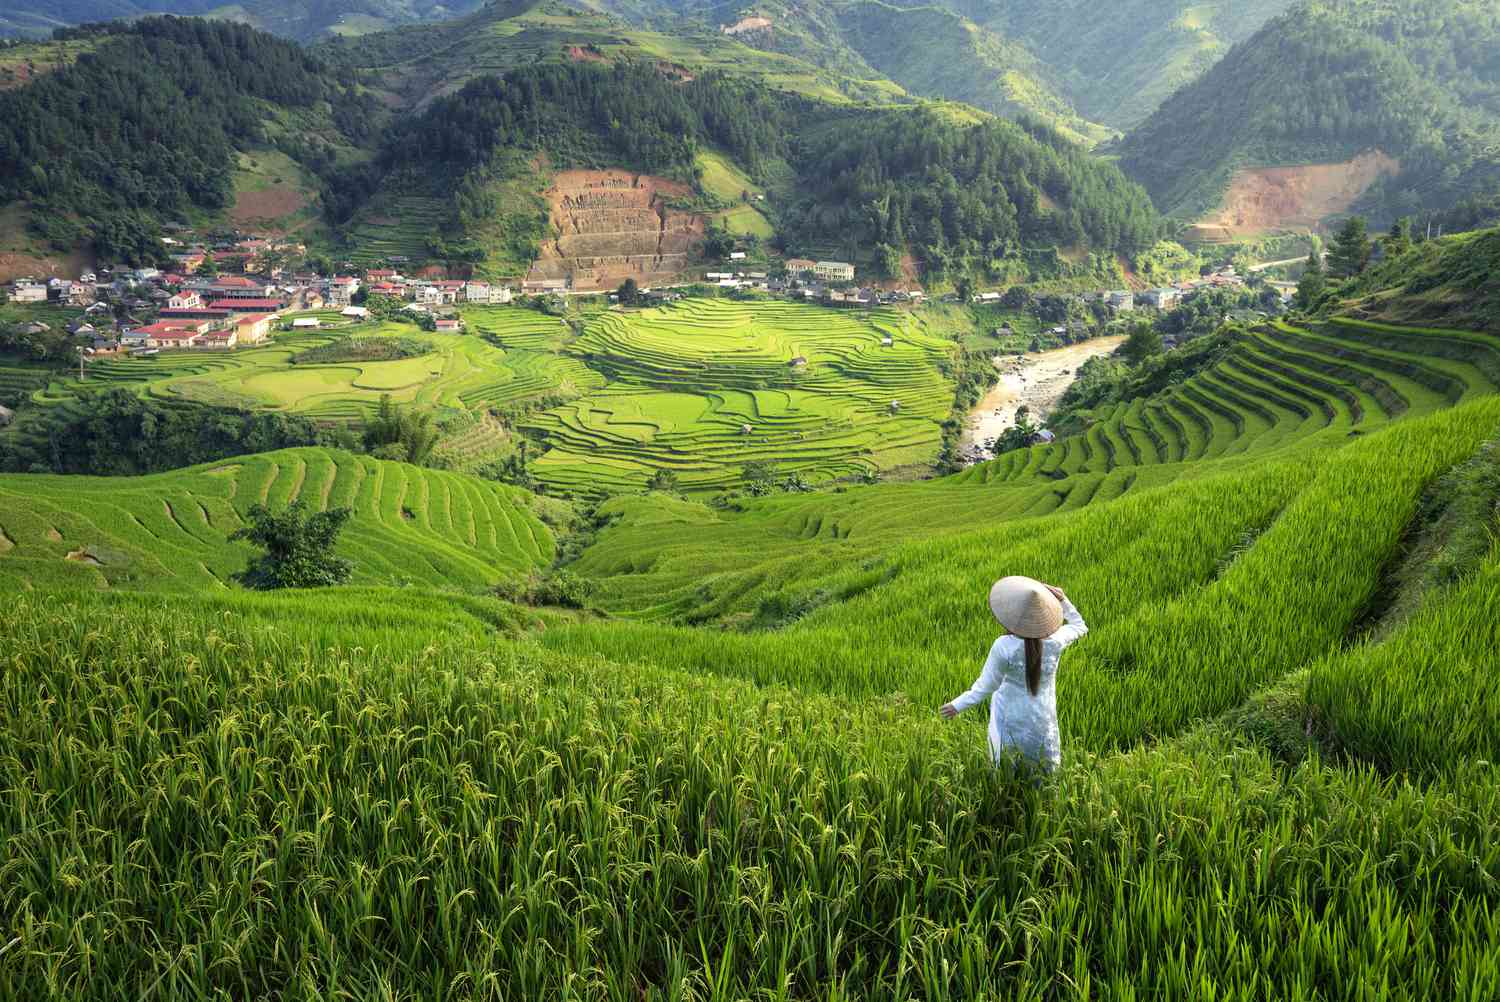 Explore the beauty of Sapa Vietnam and feel inspired by its culture, sights, and delicious food - vietnam vacation destinations